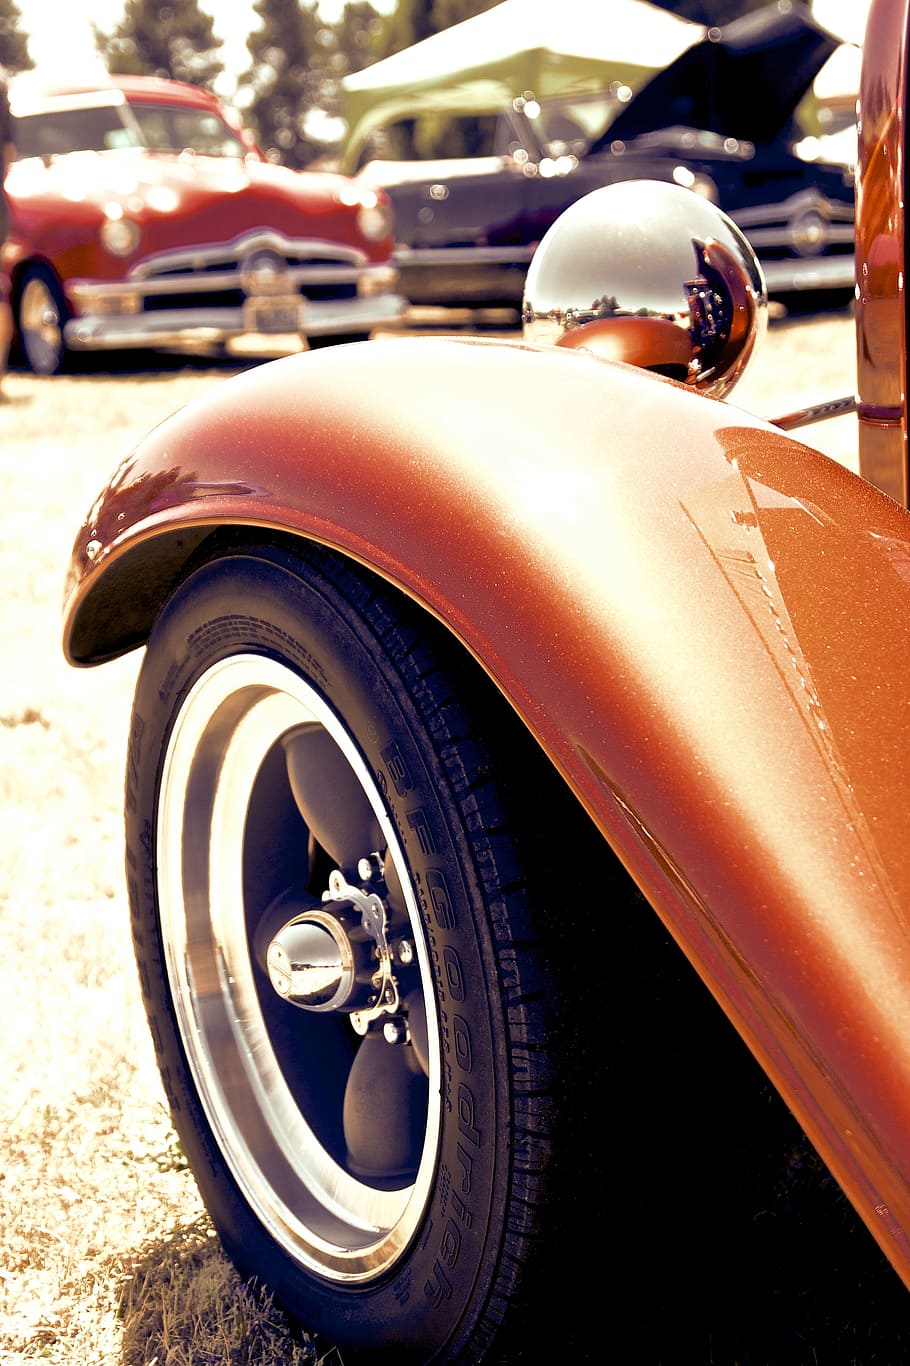 selective, focus photo, classic, orange, vehicle, cars, hotrods, muscle, roadsters, drag